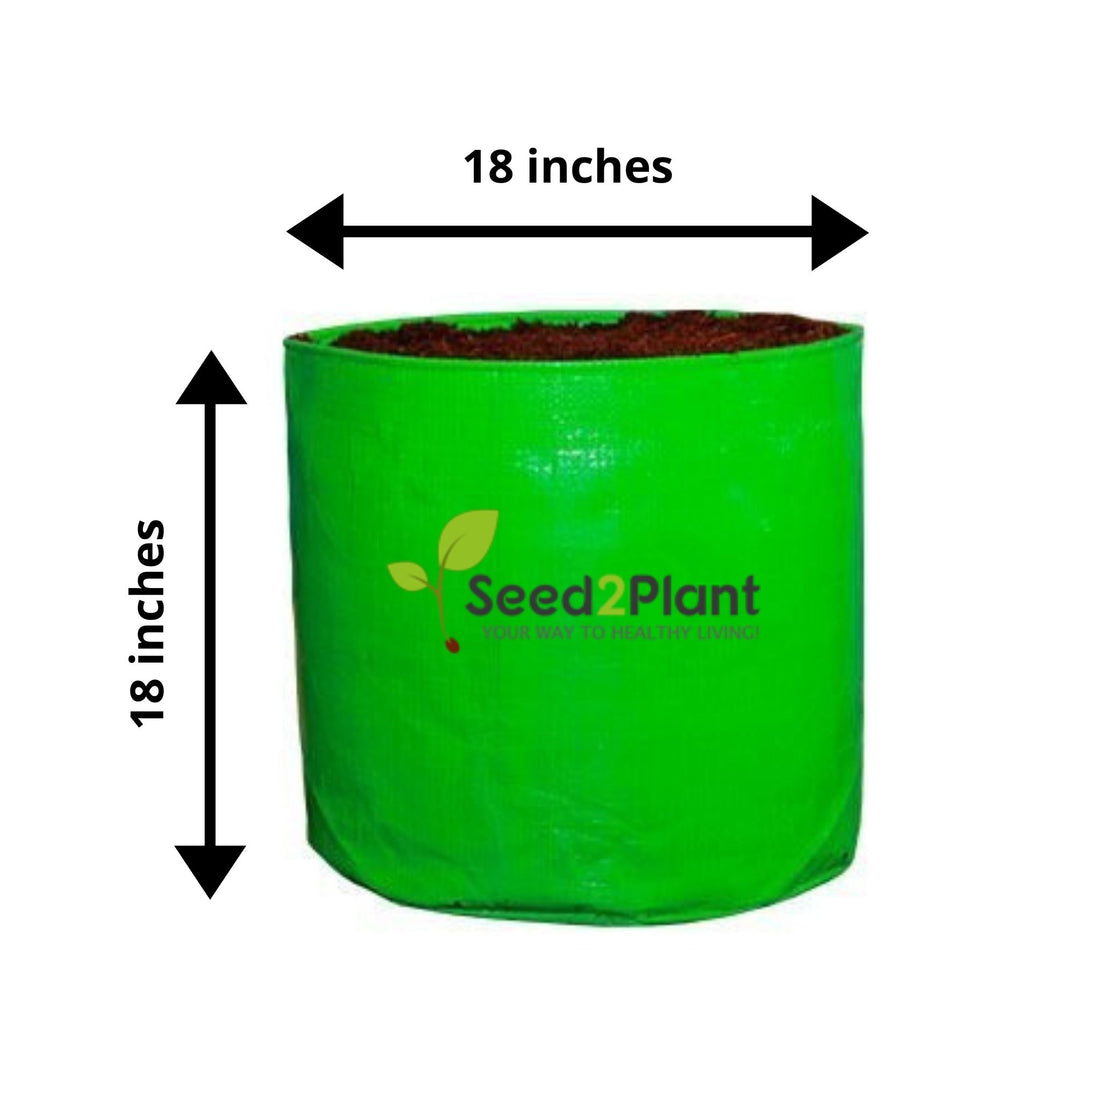 18x18 Inches (1½x1½ Ft) (Pack of 4) - 220 GSM HDPE Round Grow Bag